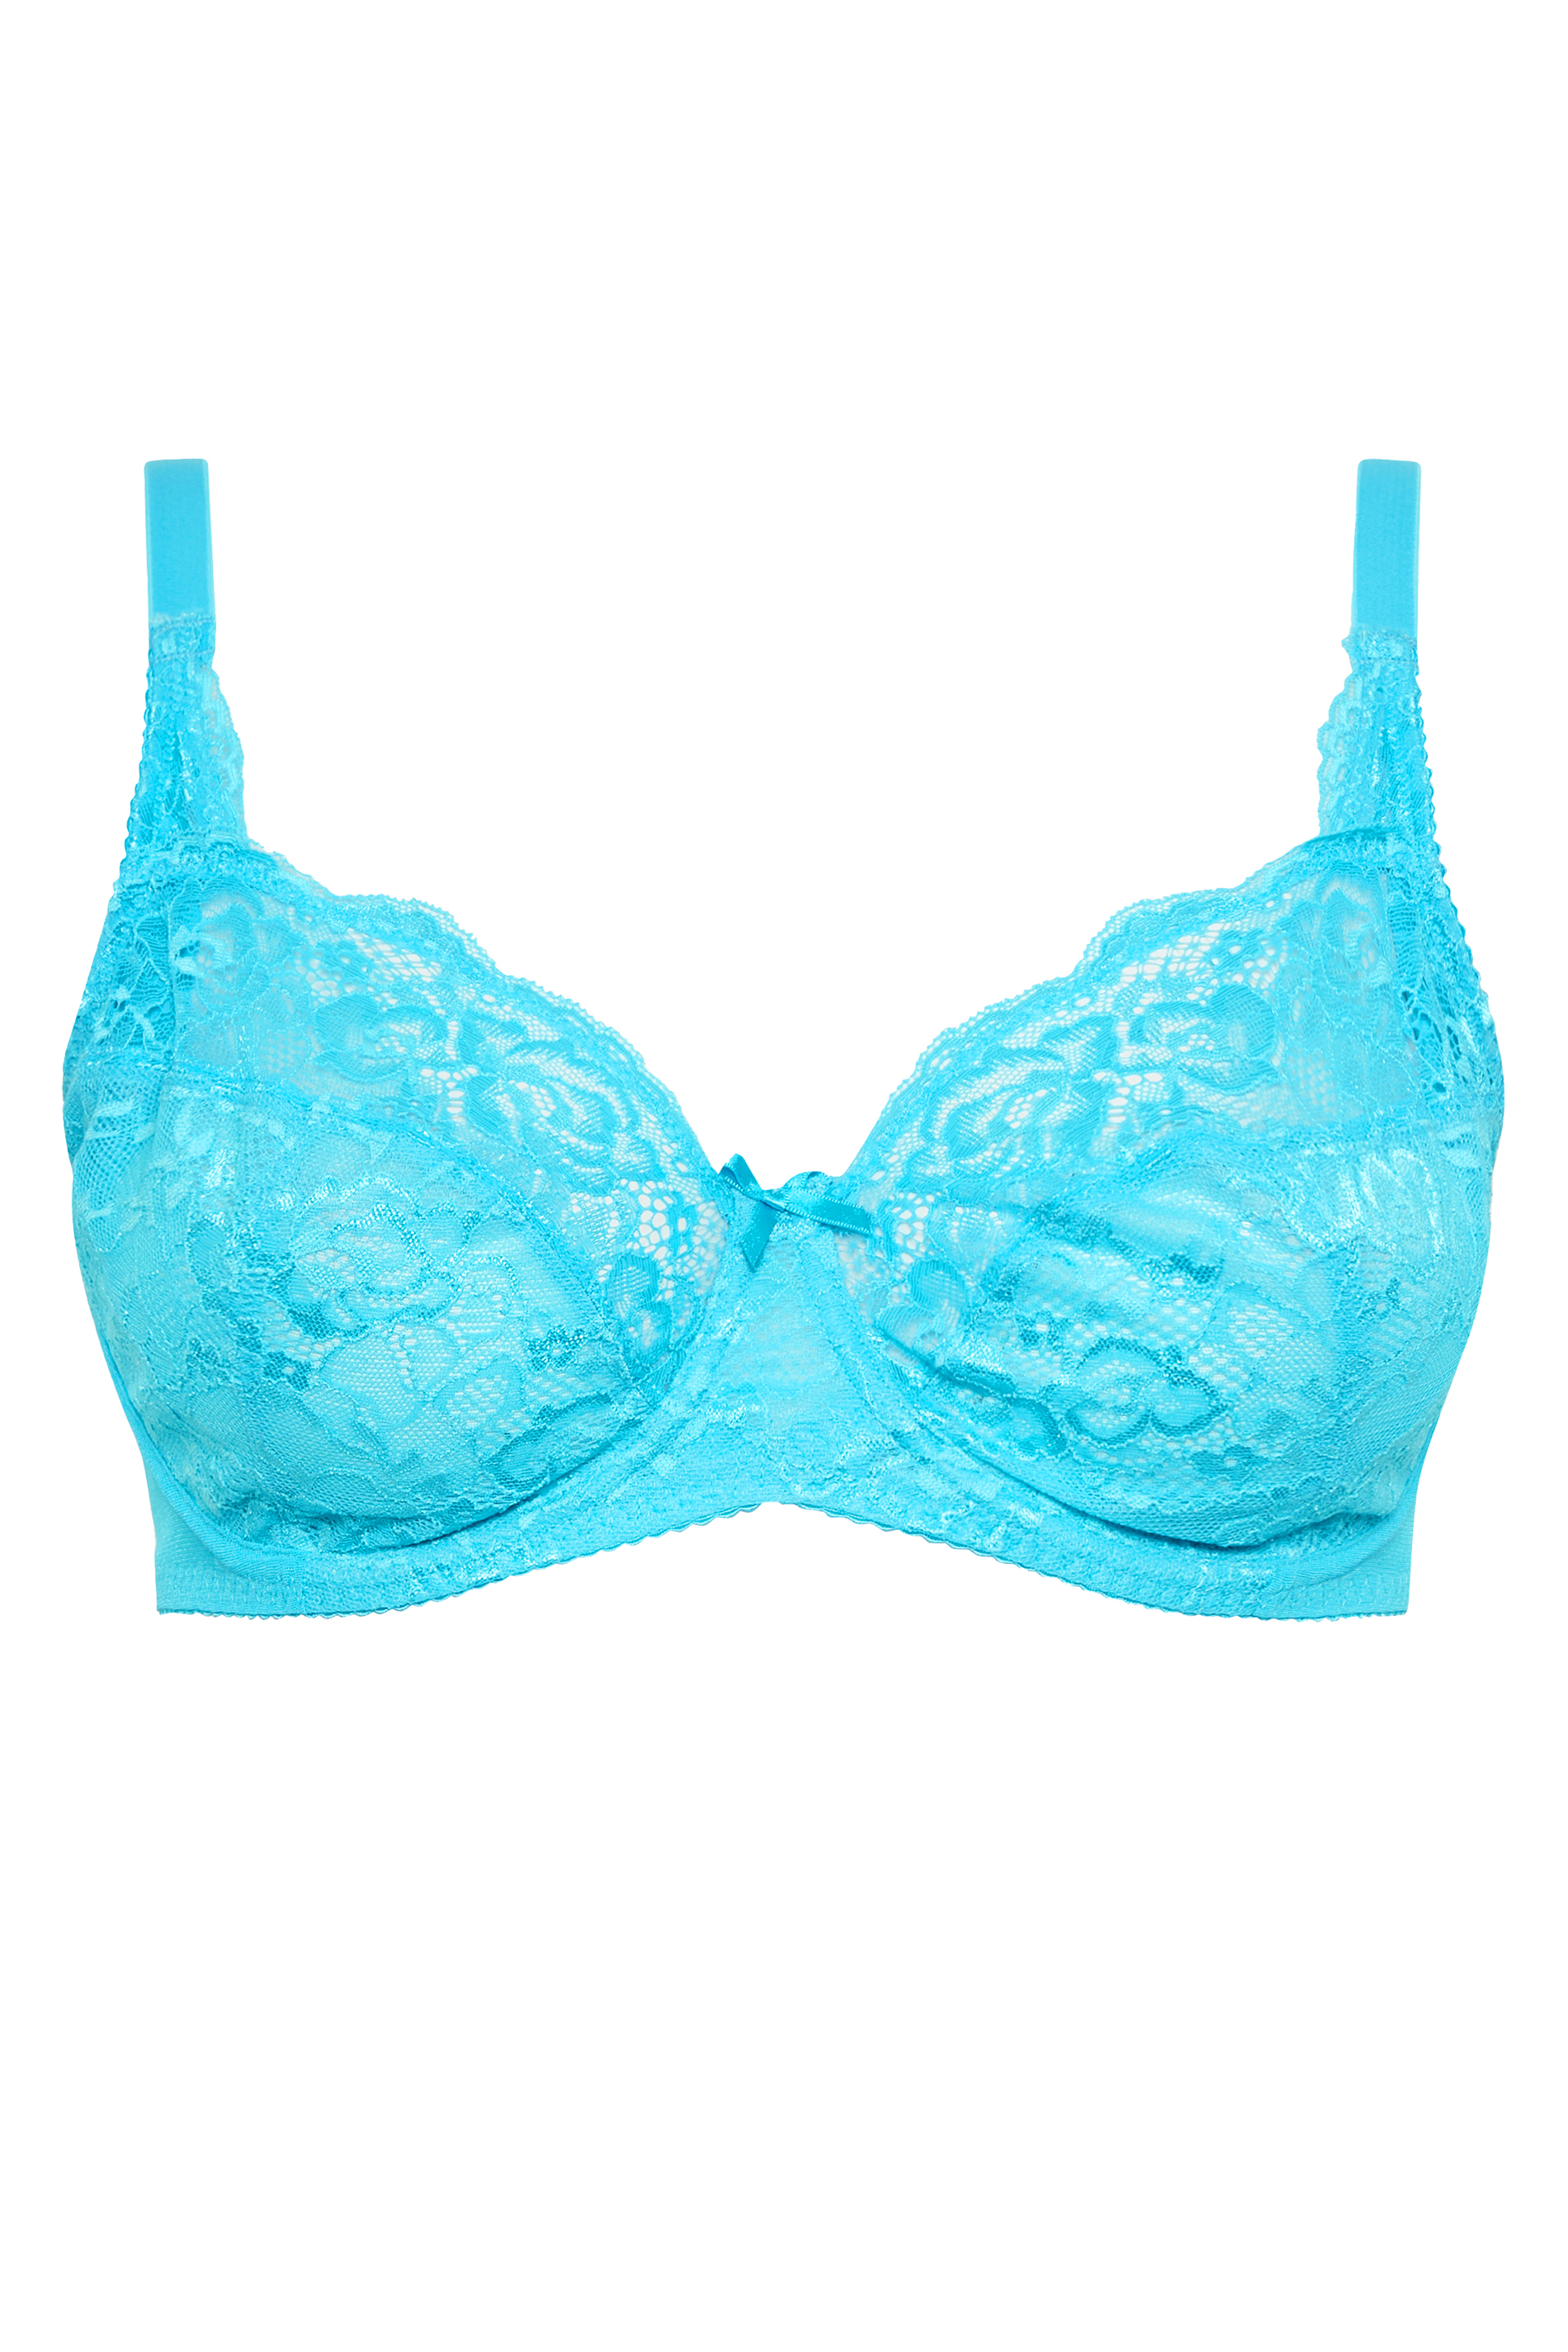 Bright Blue Stretch Lace Non-Padded Underwired Balcony Bra